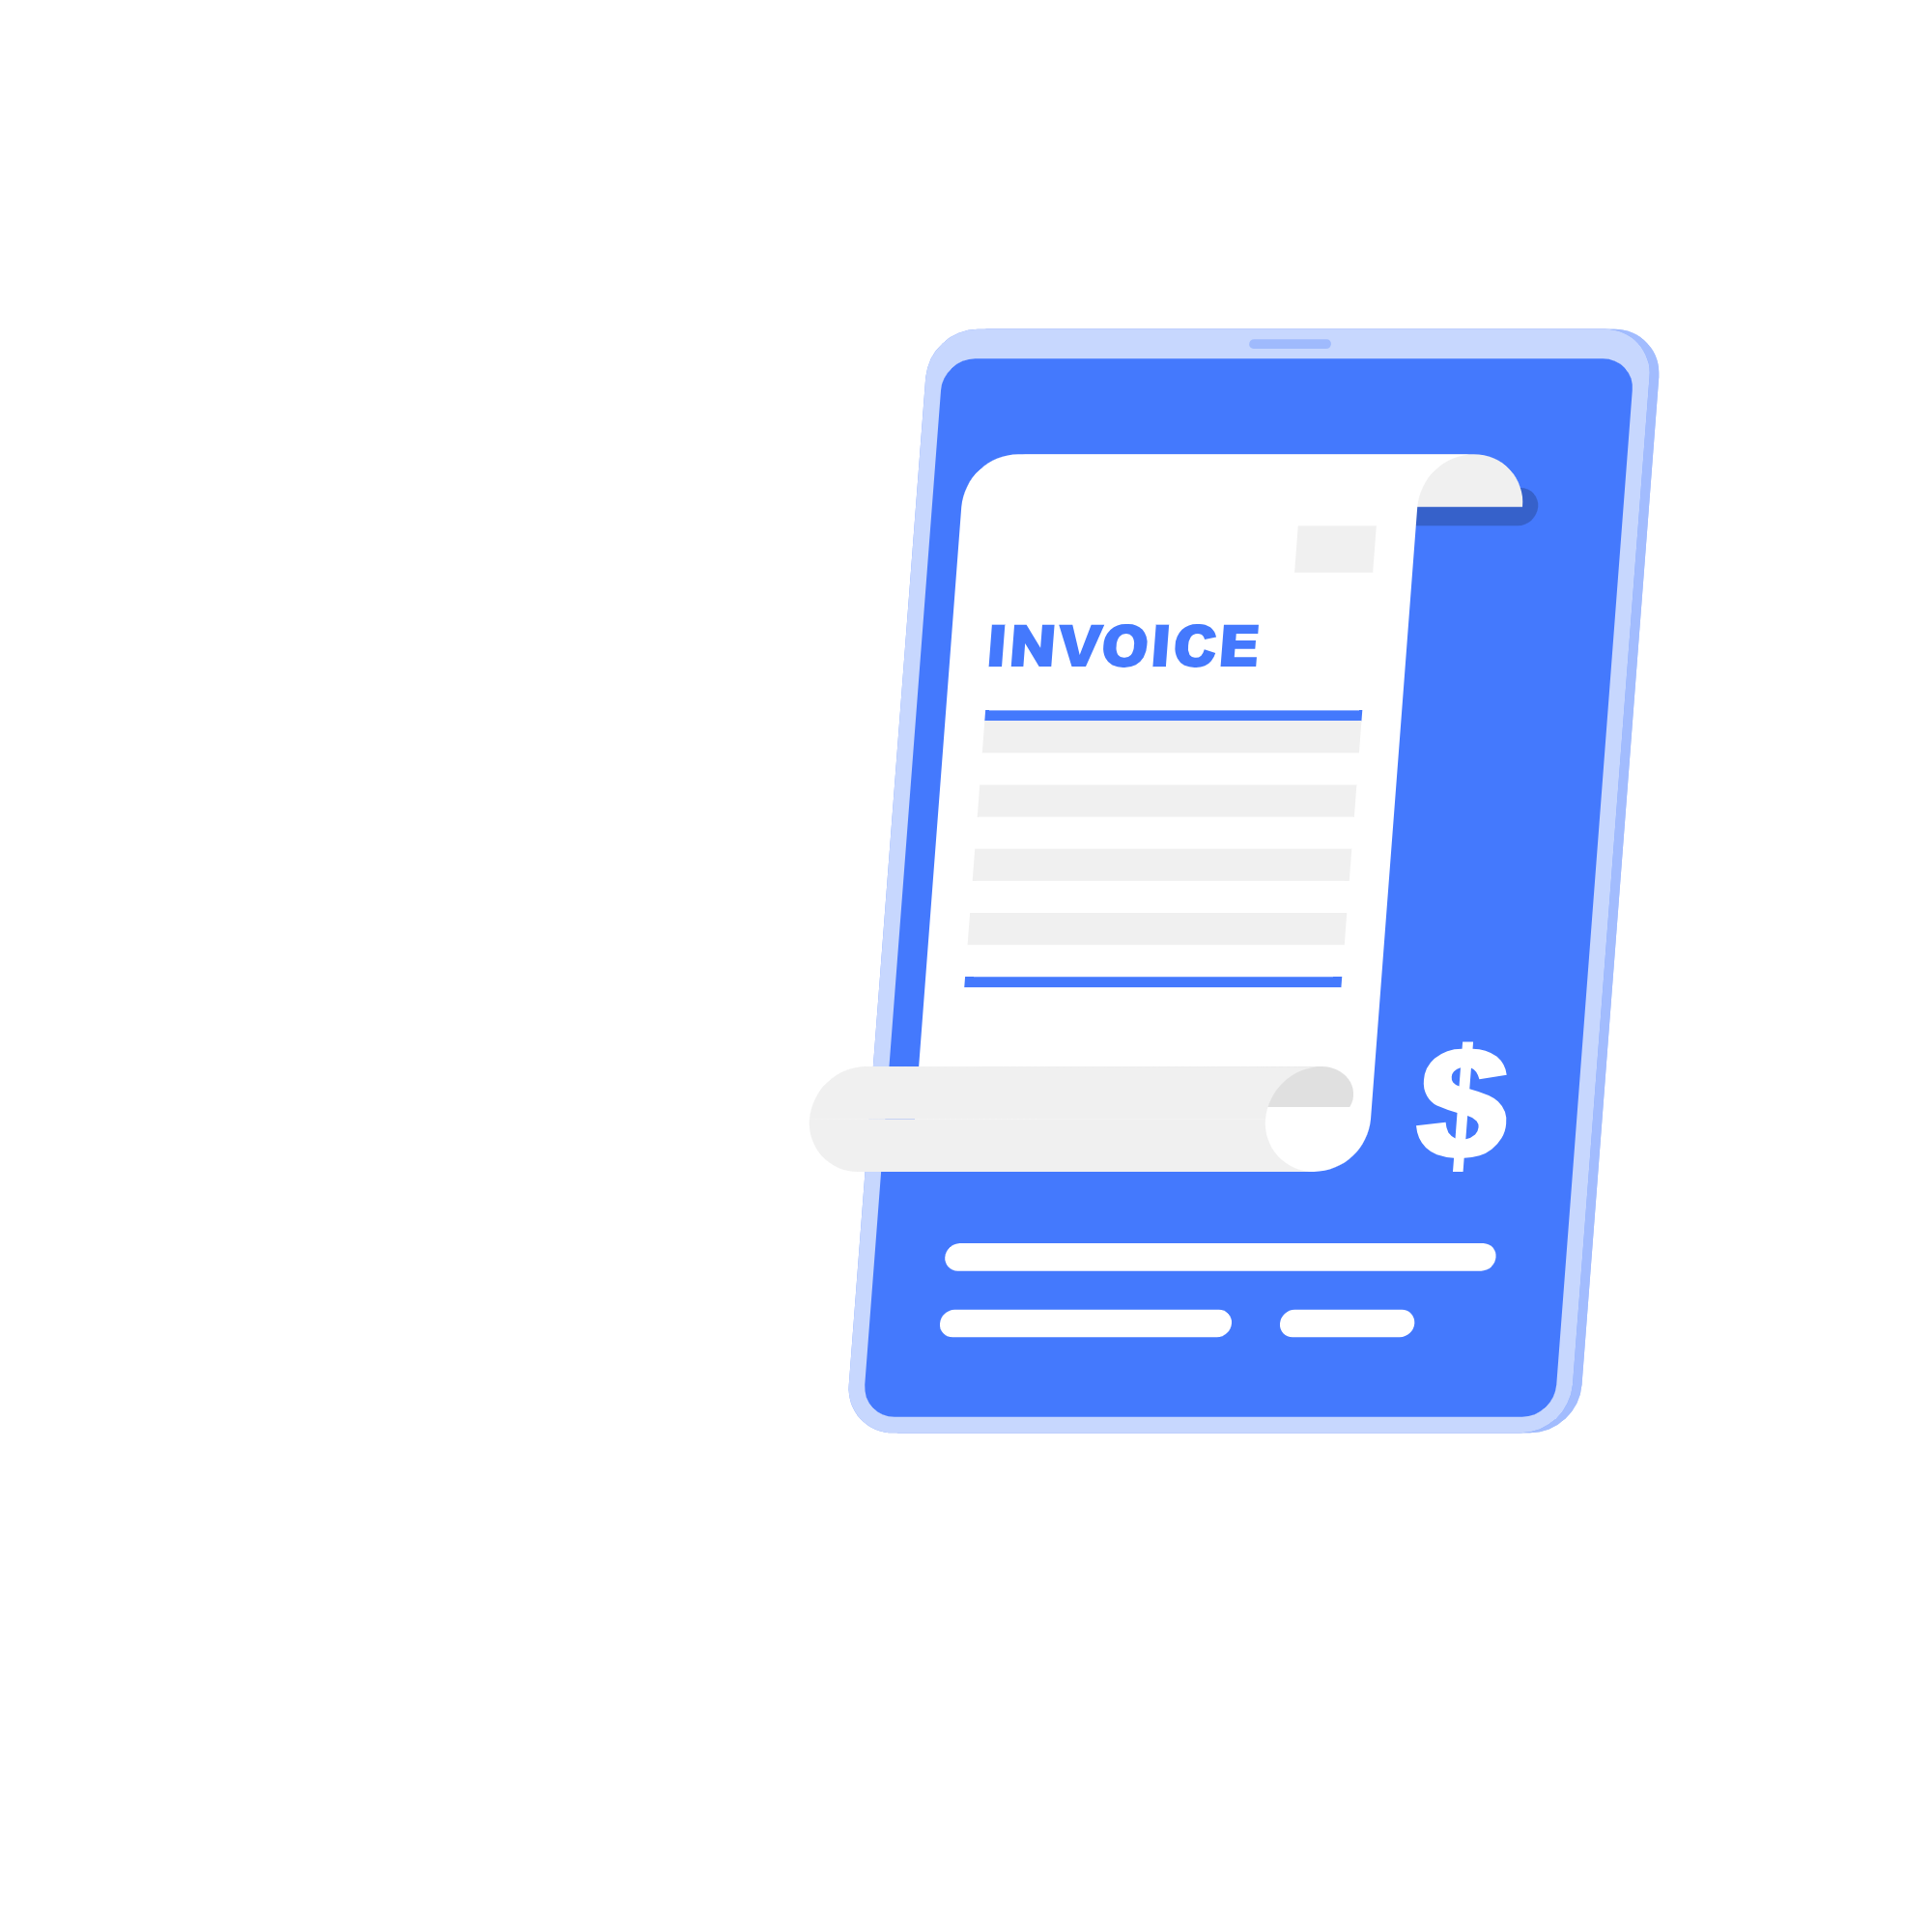 create invoices on the go